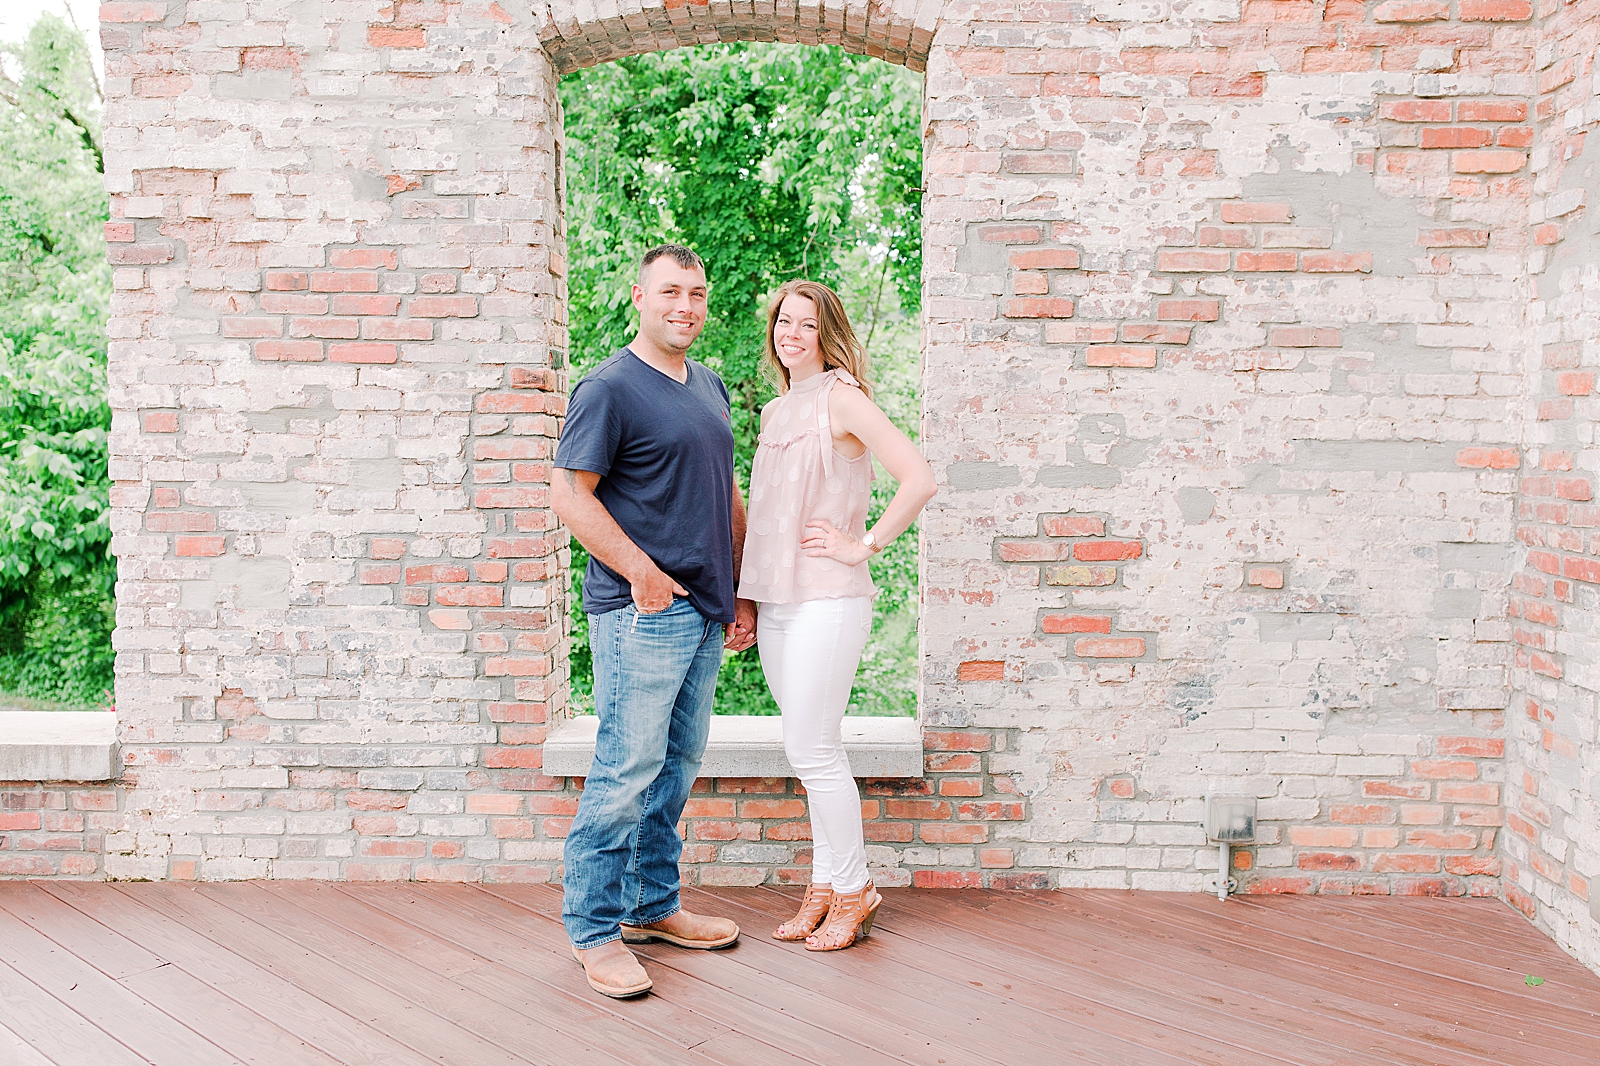 Hackney Warehouse Engagement Session Couple smiling at camera in front of brick wall Photo